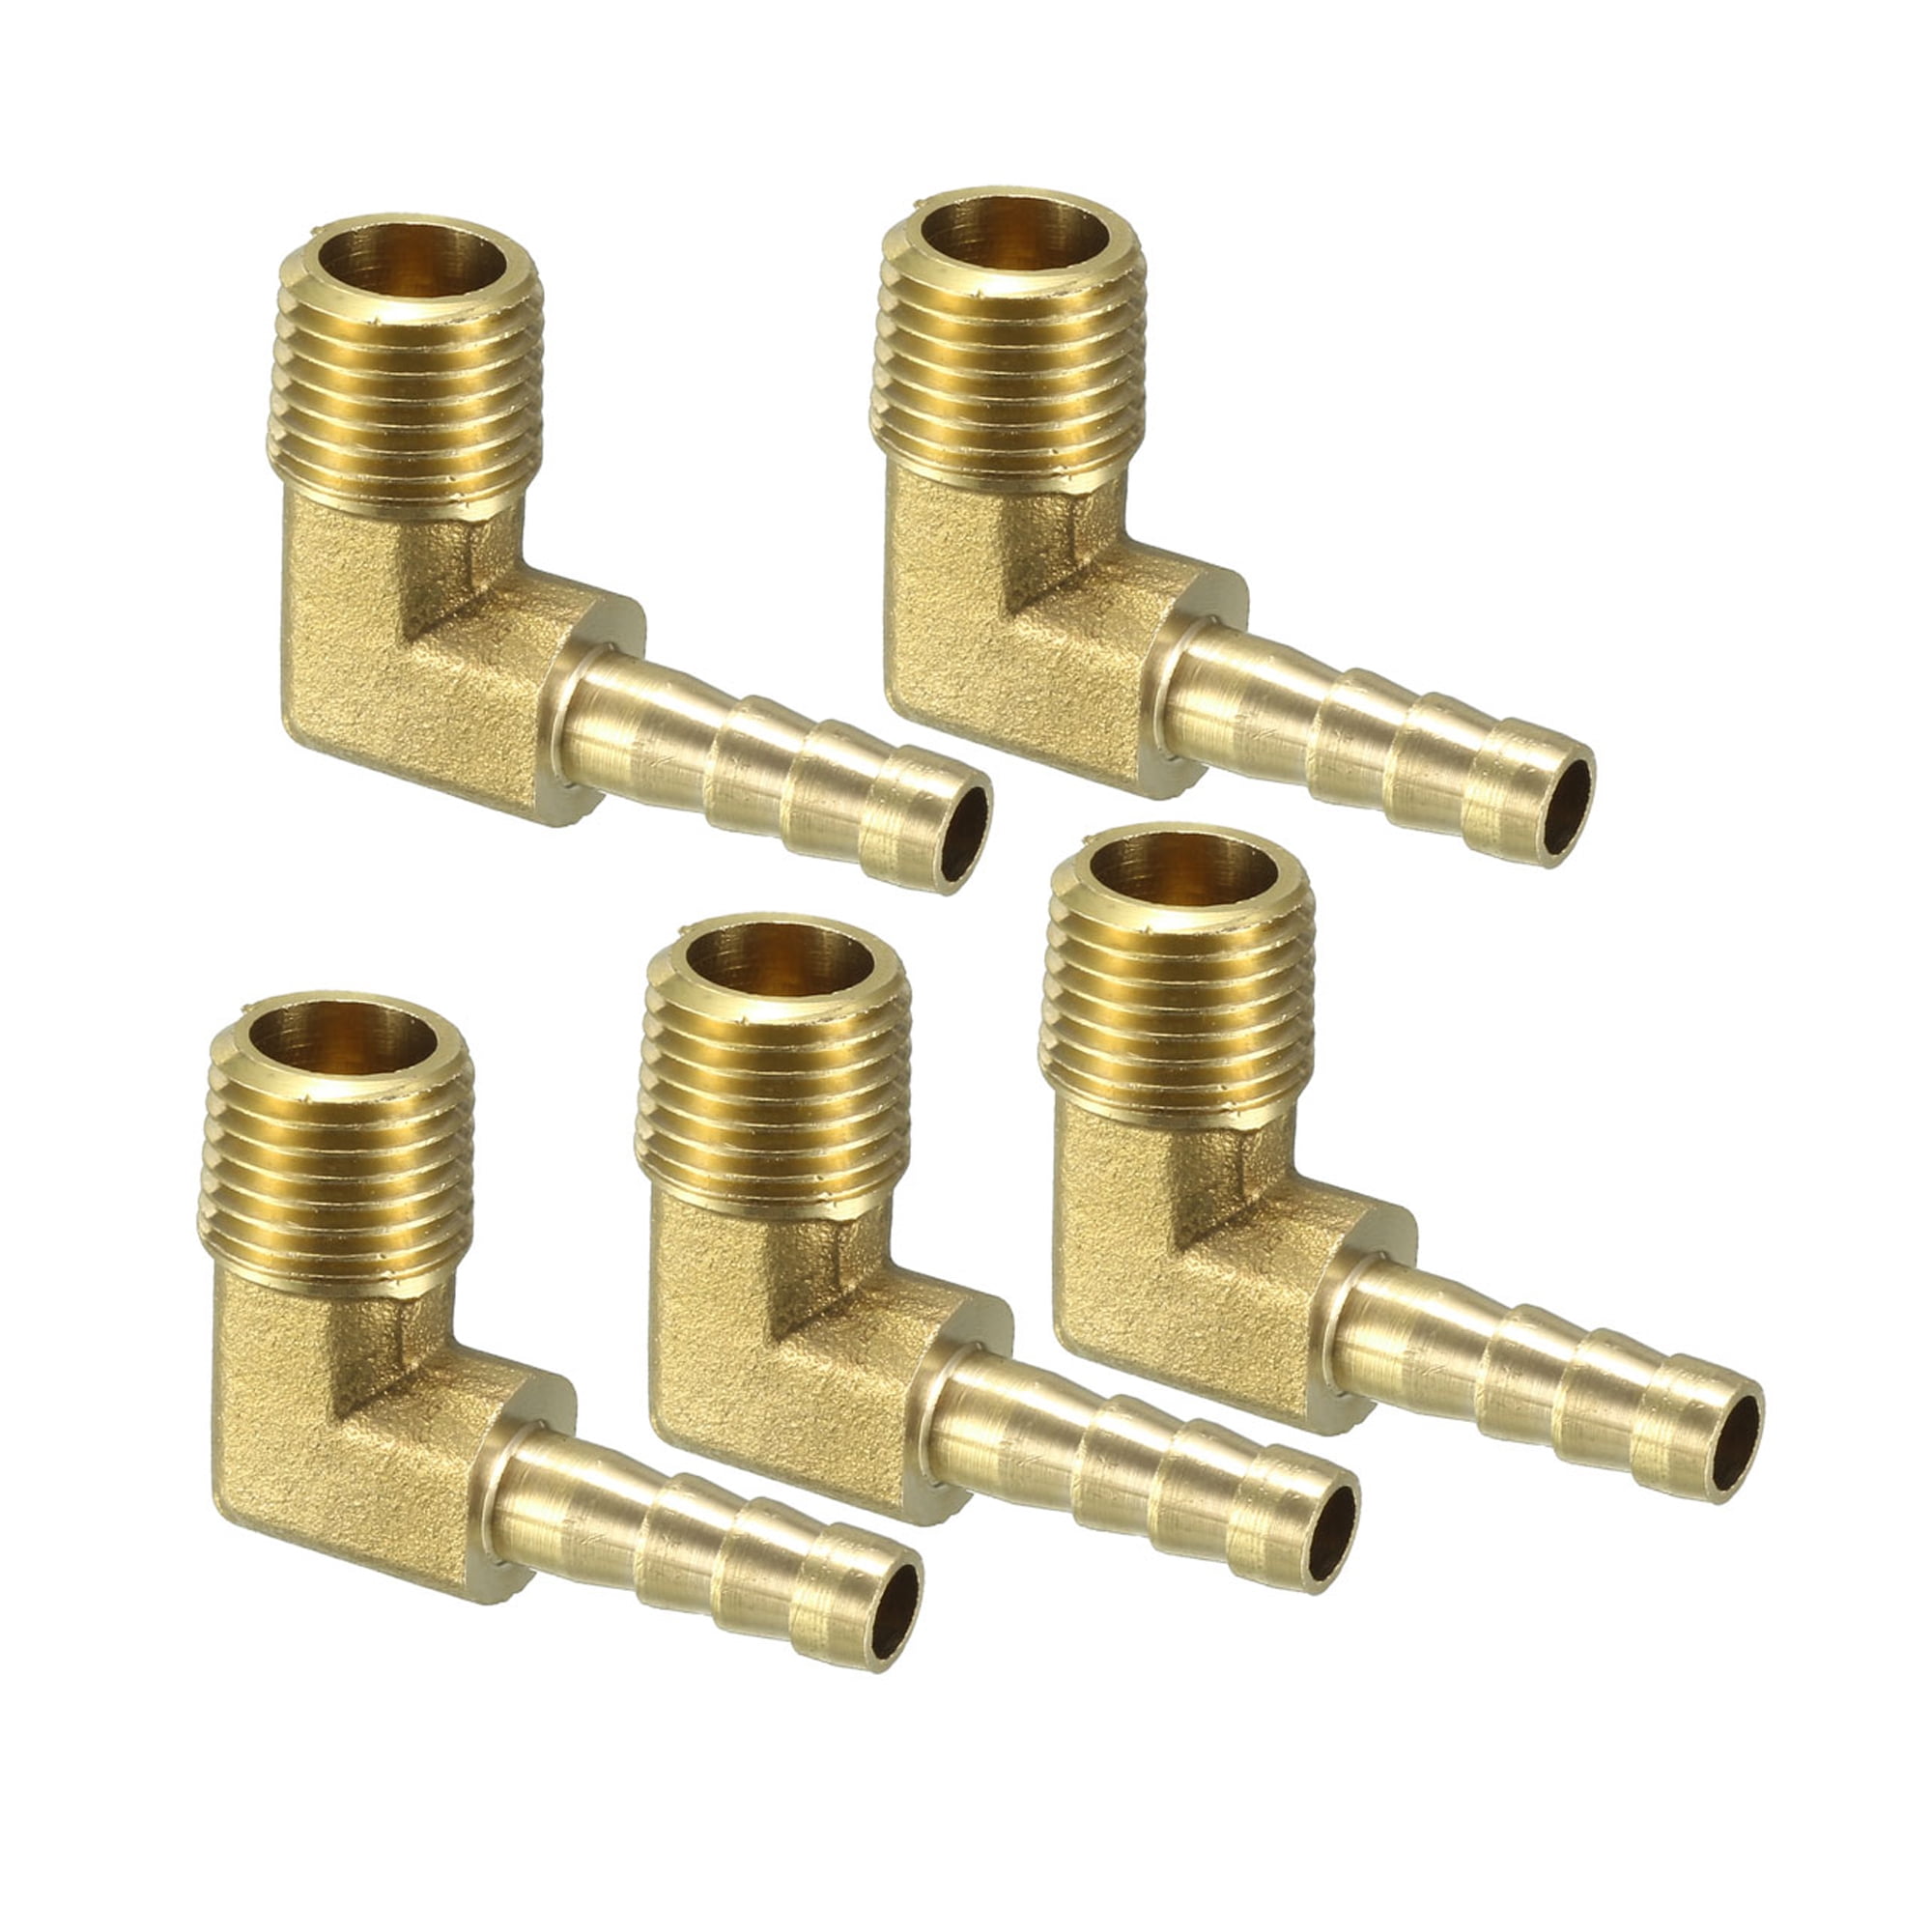 BRASS, 3/8 MPT x 1/4 BARB ADAPTER 3pack 